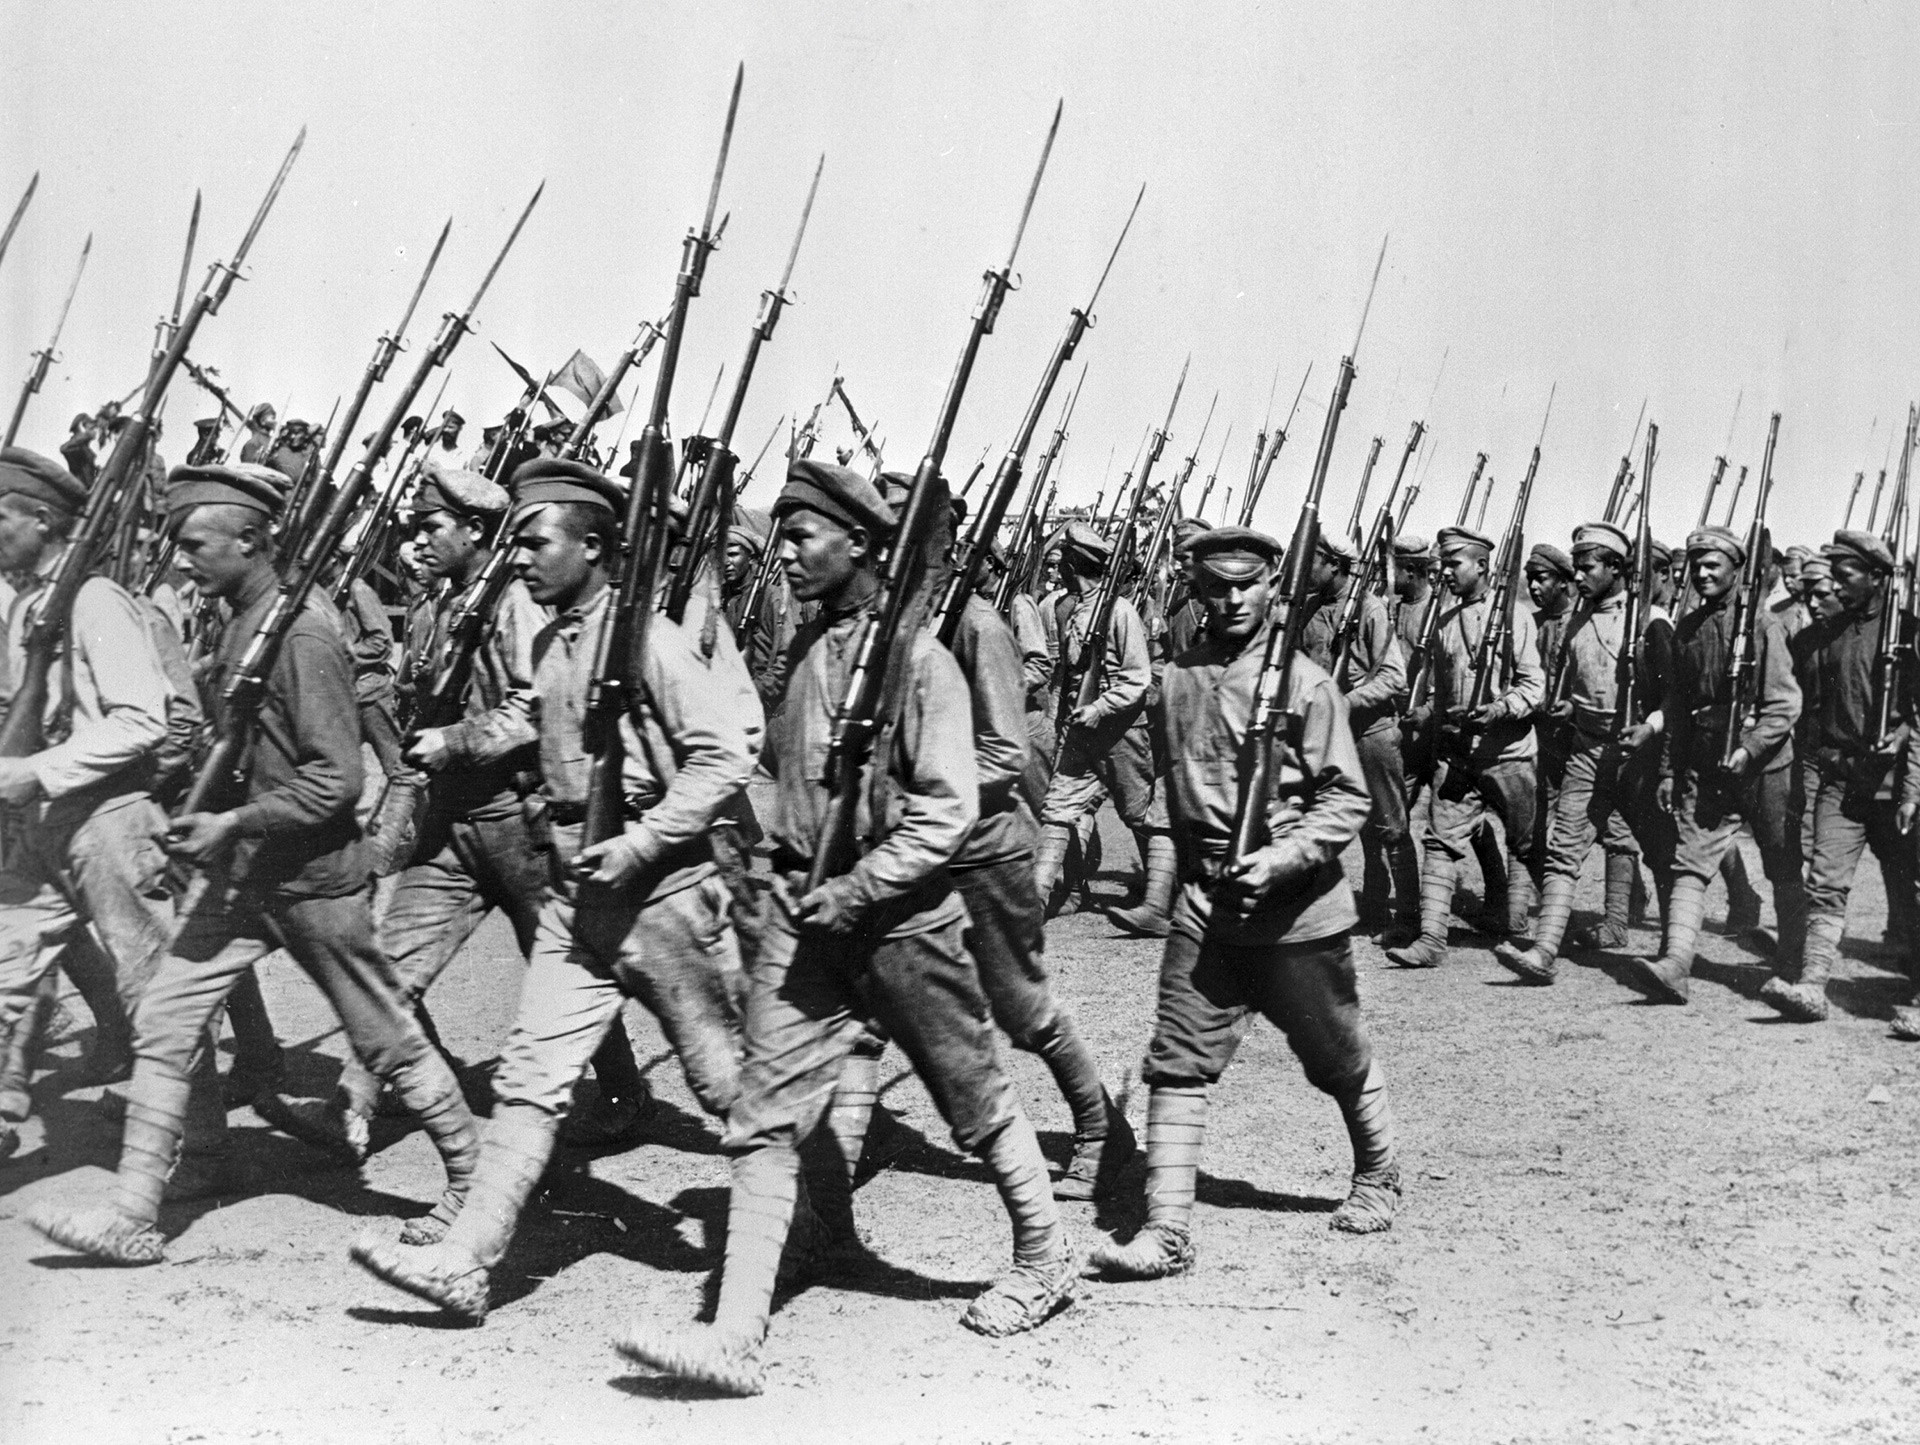 Early Soviet soldiers wearing lapti